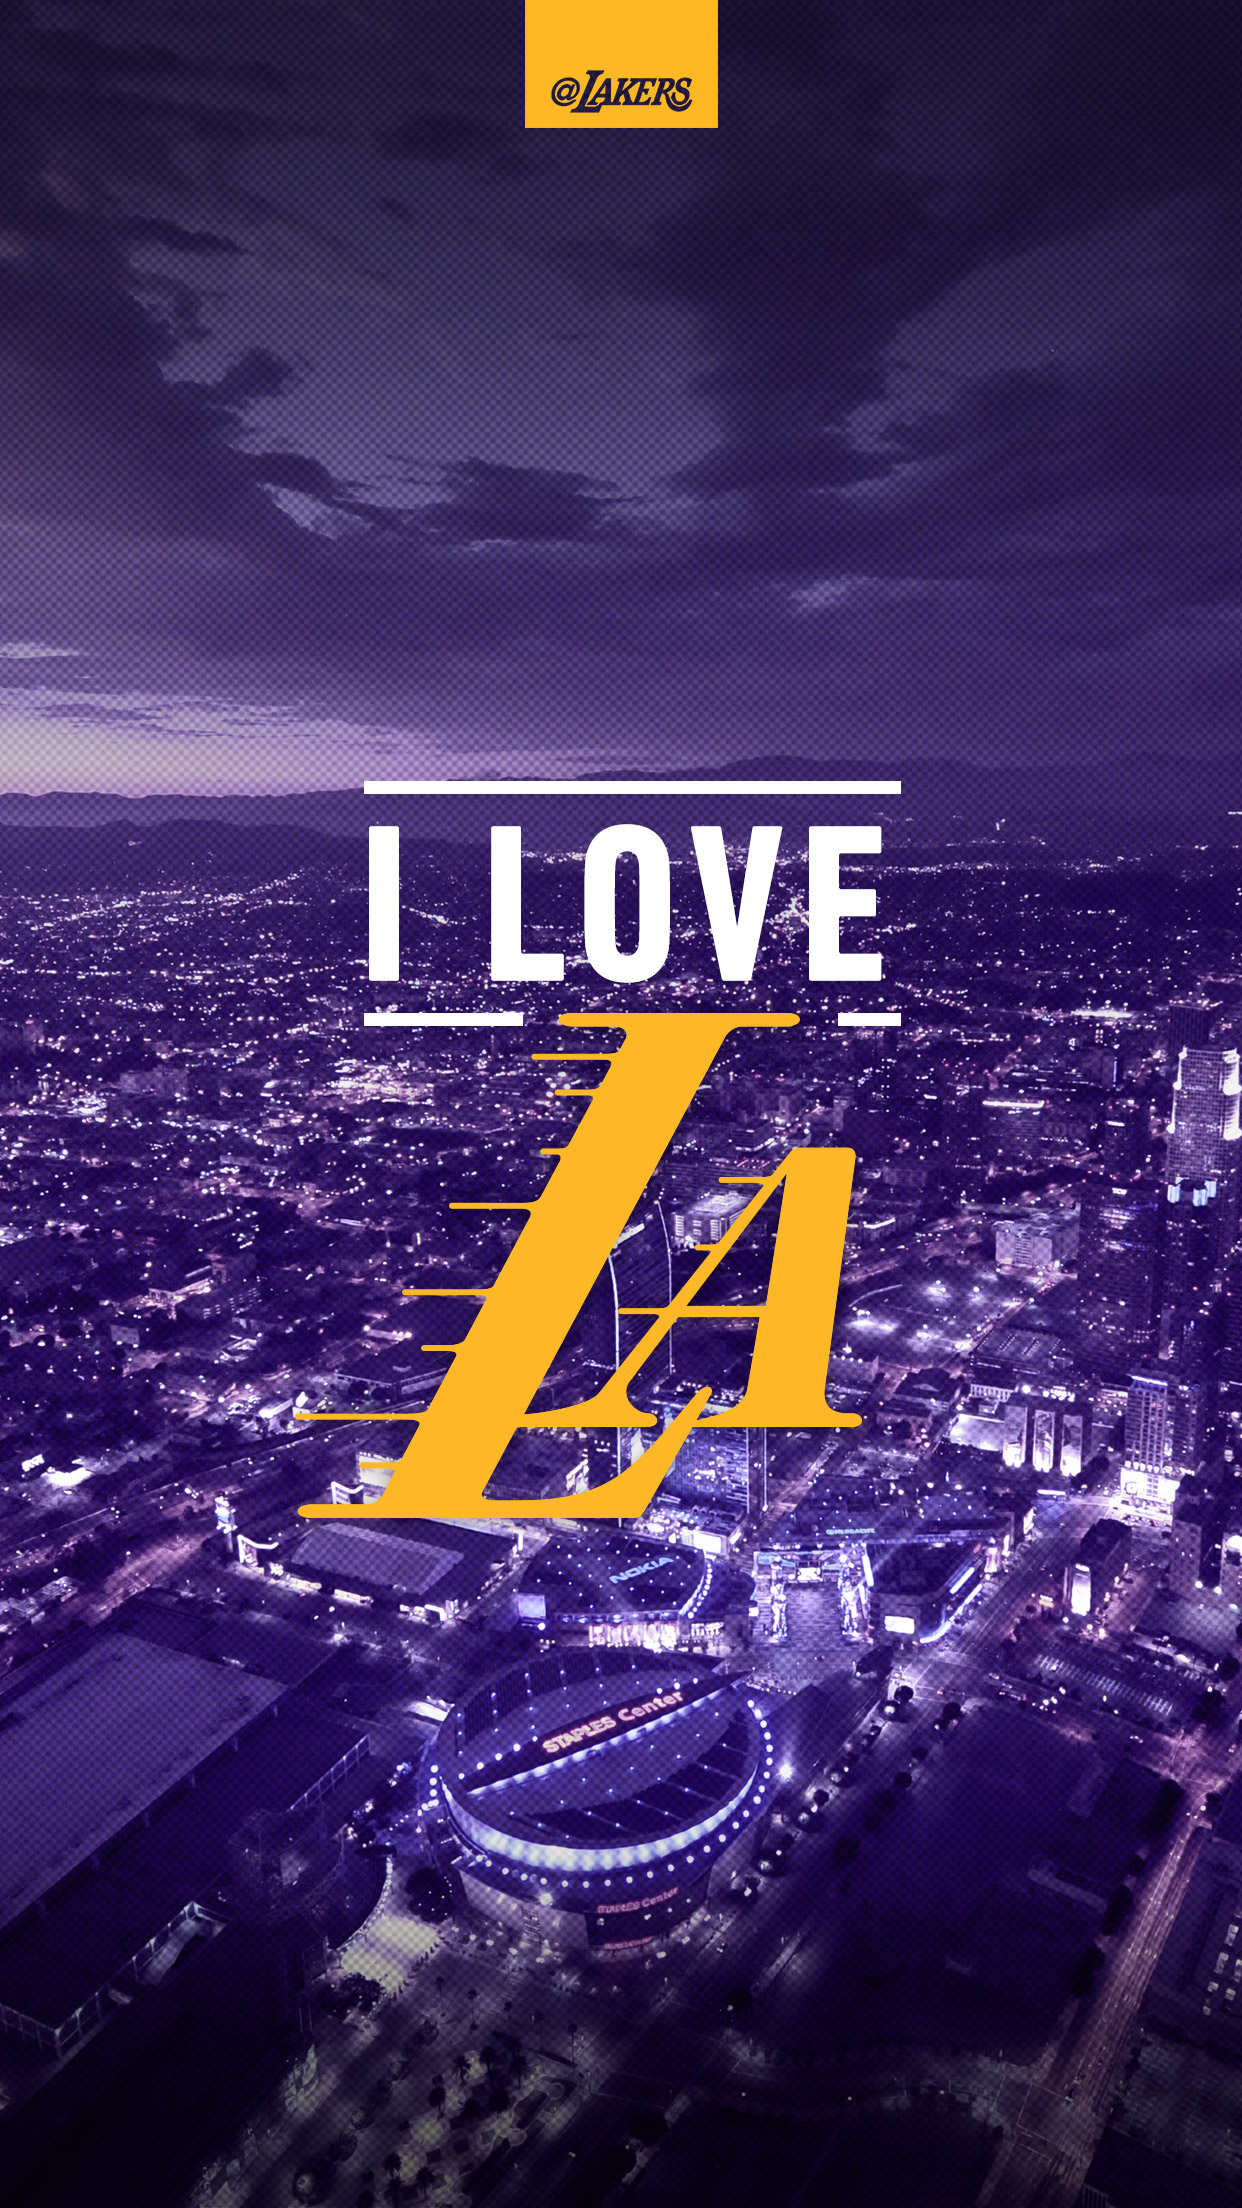 4k wallpaper for Los Angeles Lakers APK for Android Download